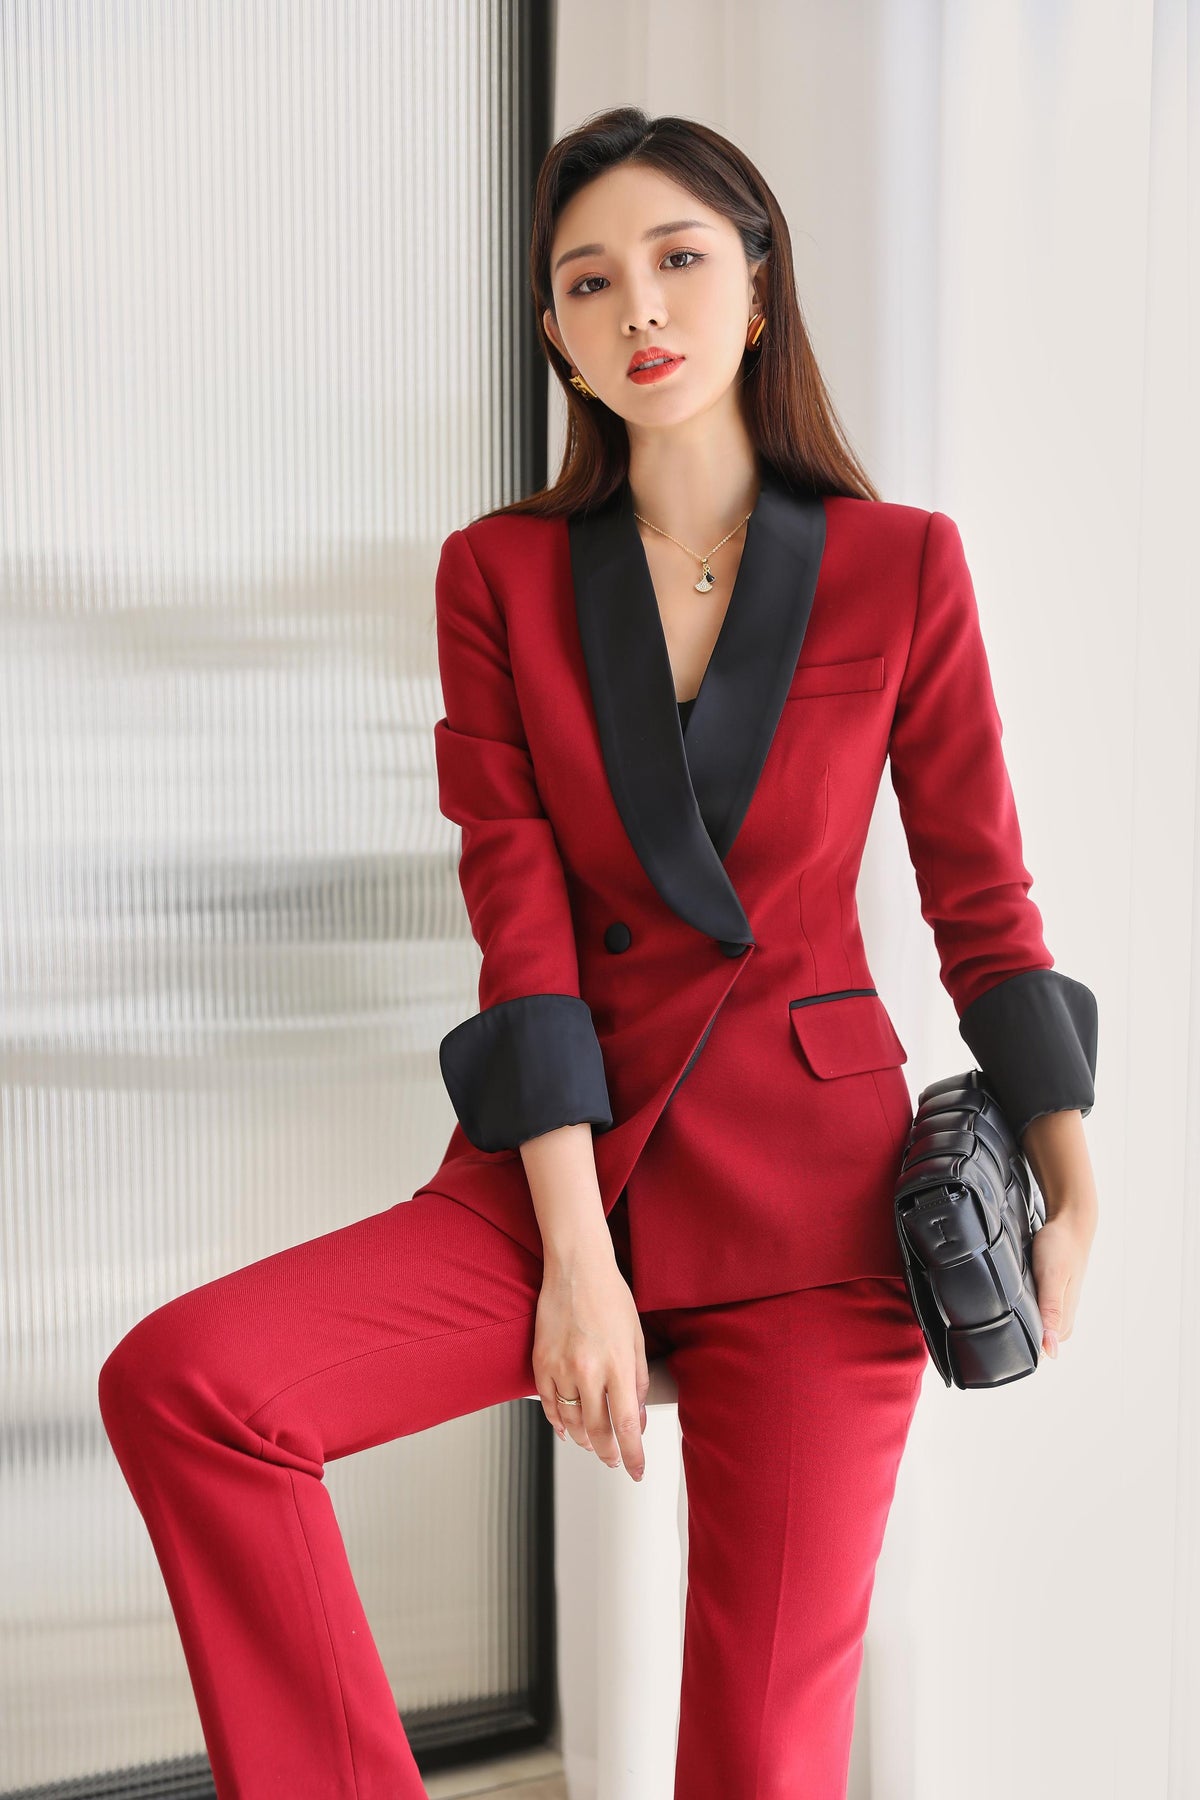 Red Office Women 3 Piece Suit With Slim Fit Pants, Buttoned Vest and  Single-breasted Blazer, Womens Office Wear, Red Pants Suit - Etsy |  Pantsuits for women, Suits for women, Womens suits business